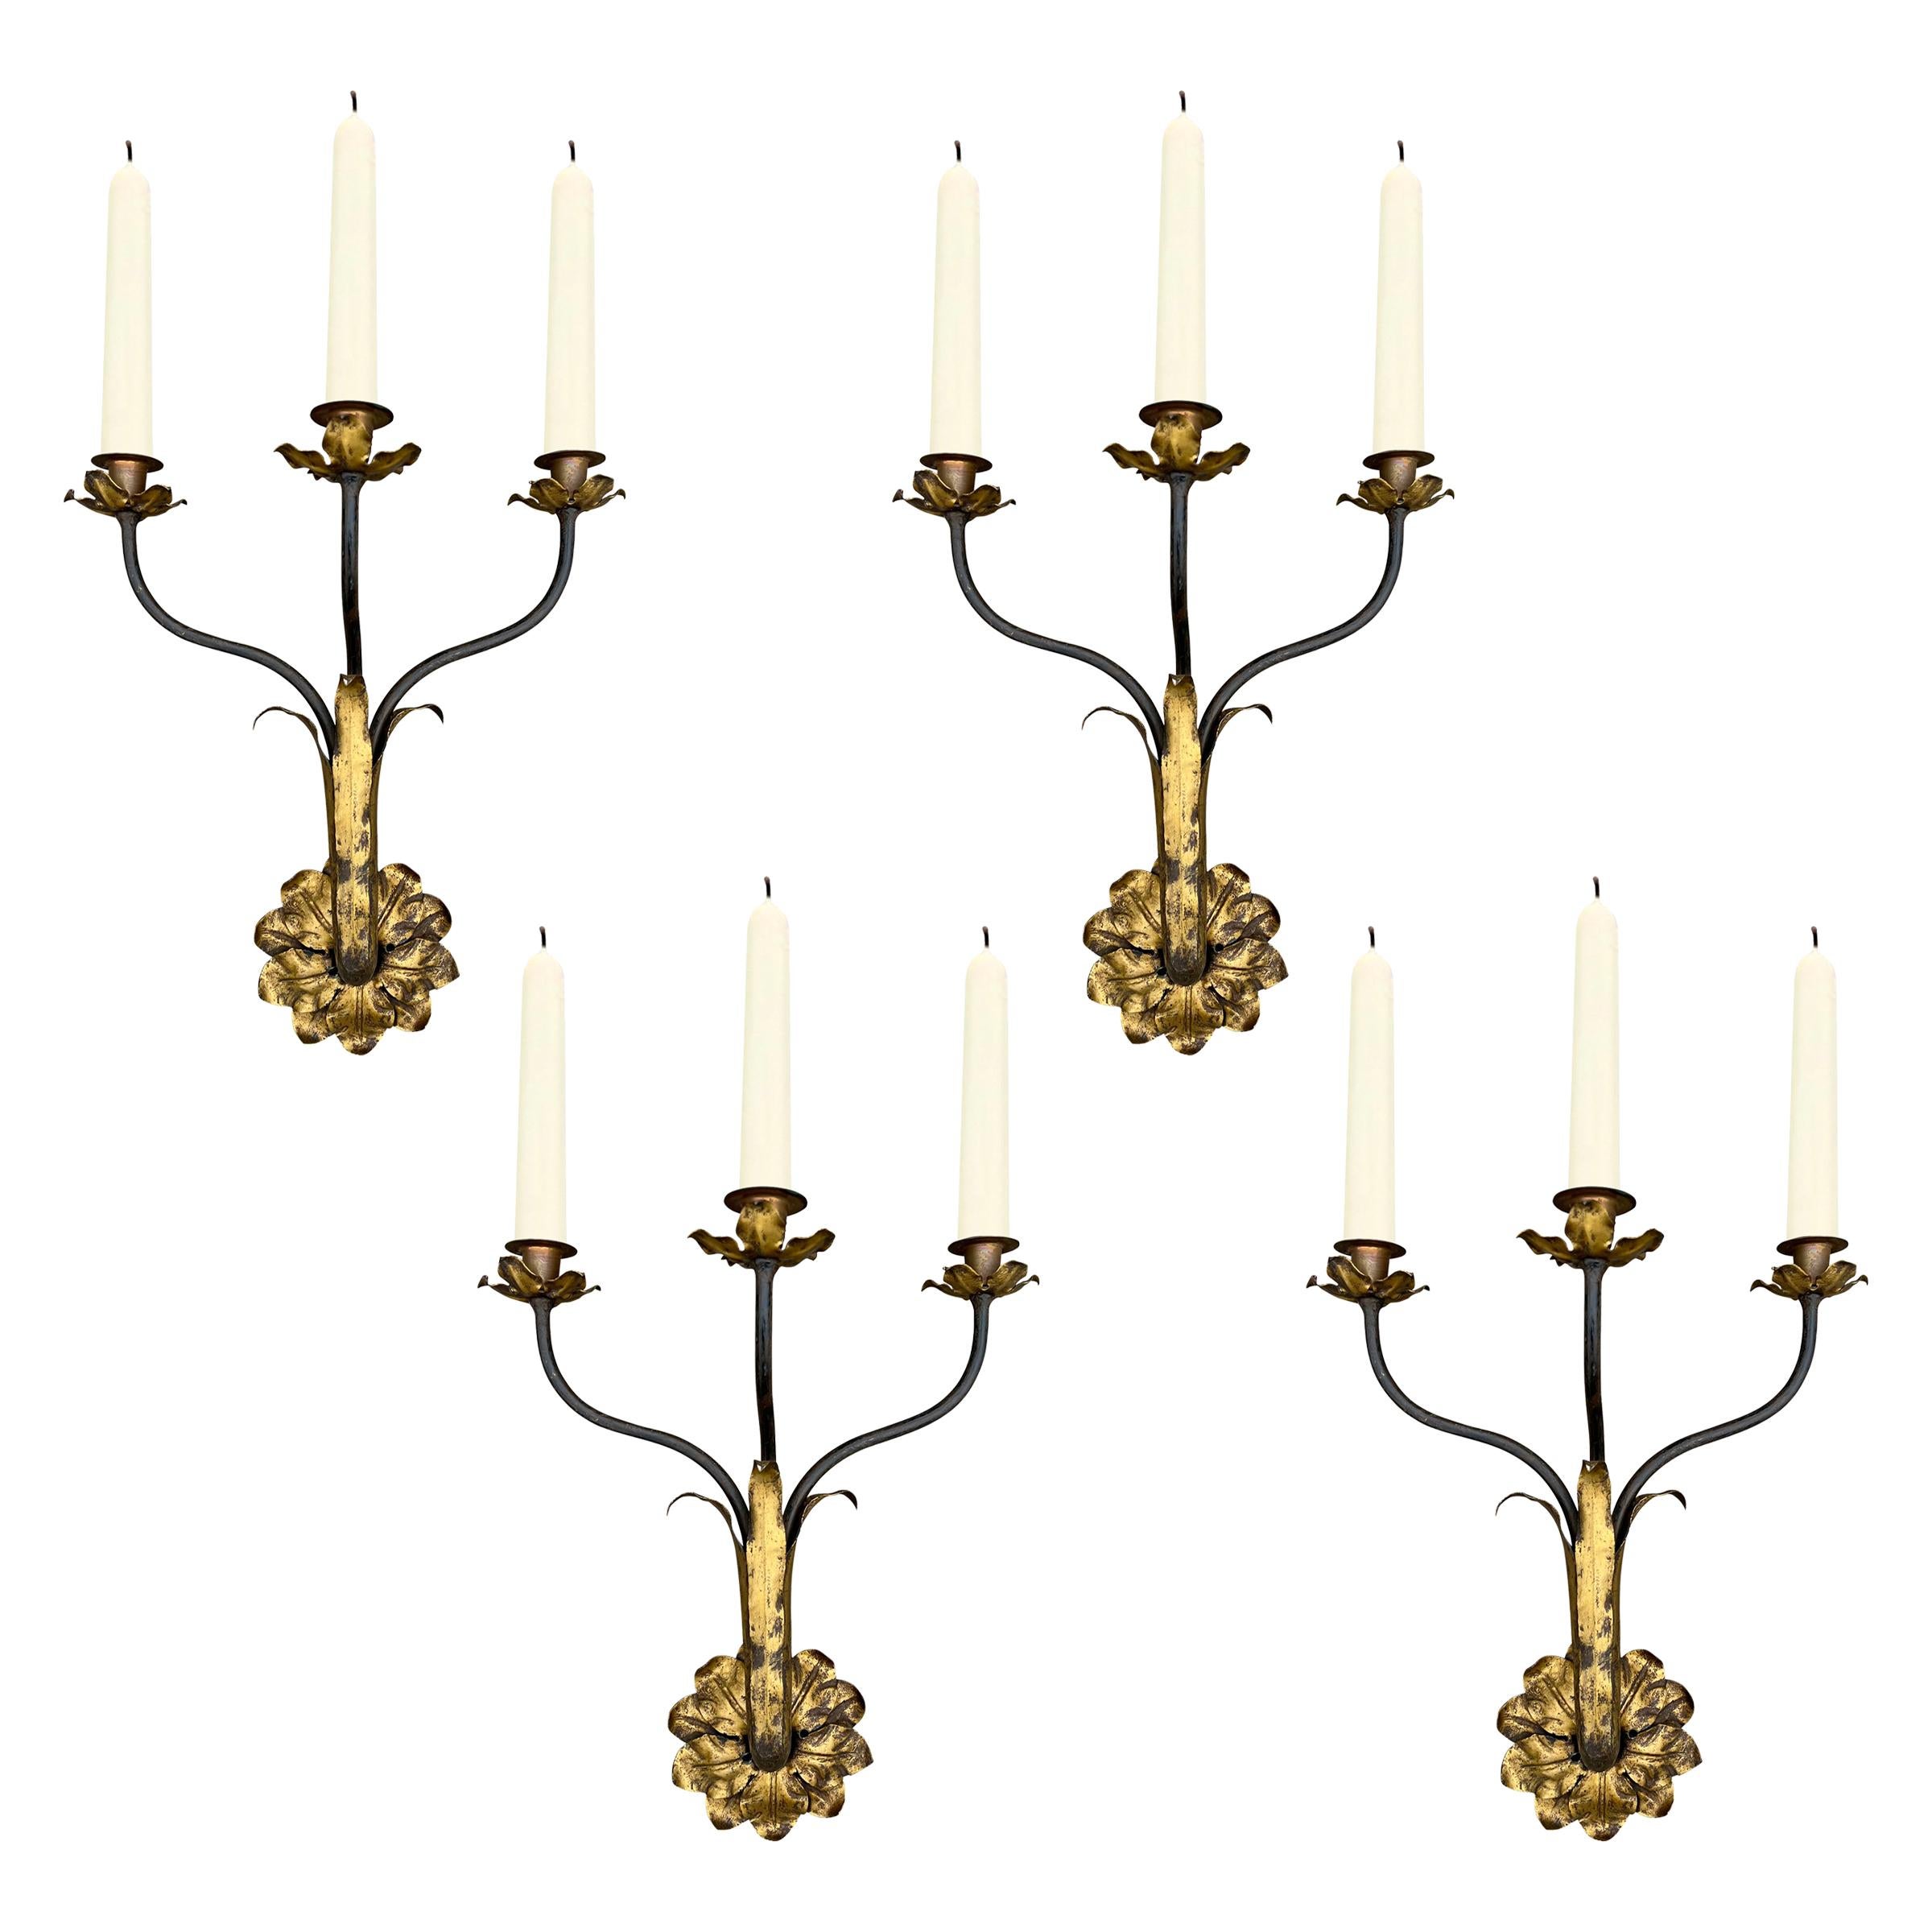 Set of Four Early 20th Century Italian Gilt Iron Candle Sconces In Good Condition For Sale In Chicago, IL